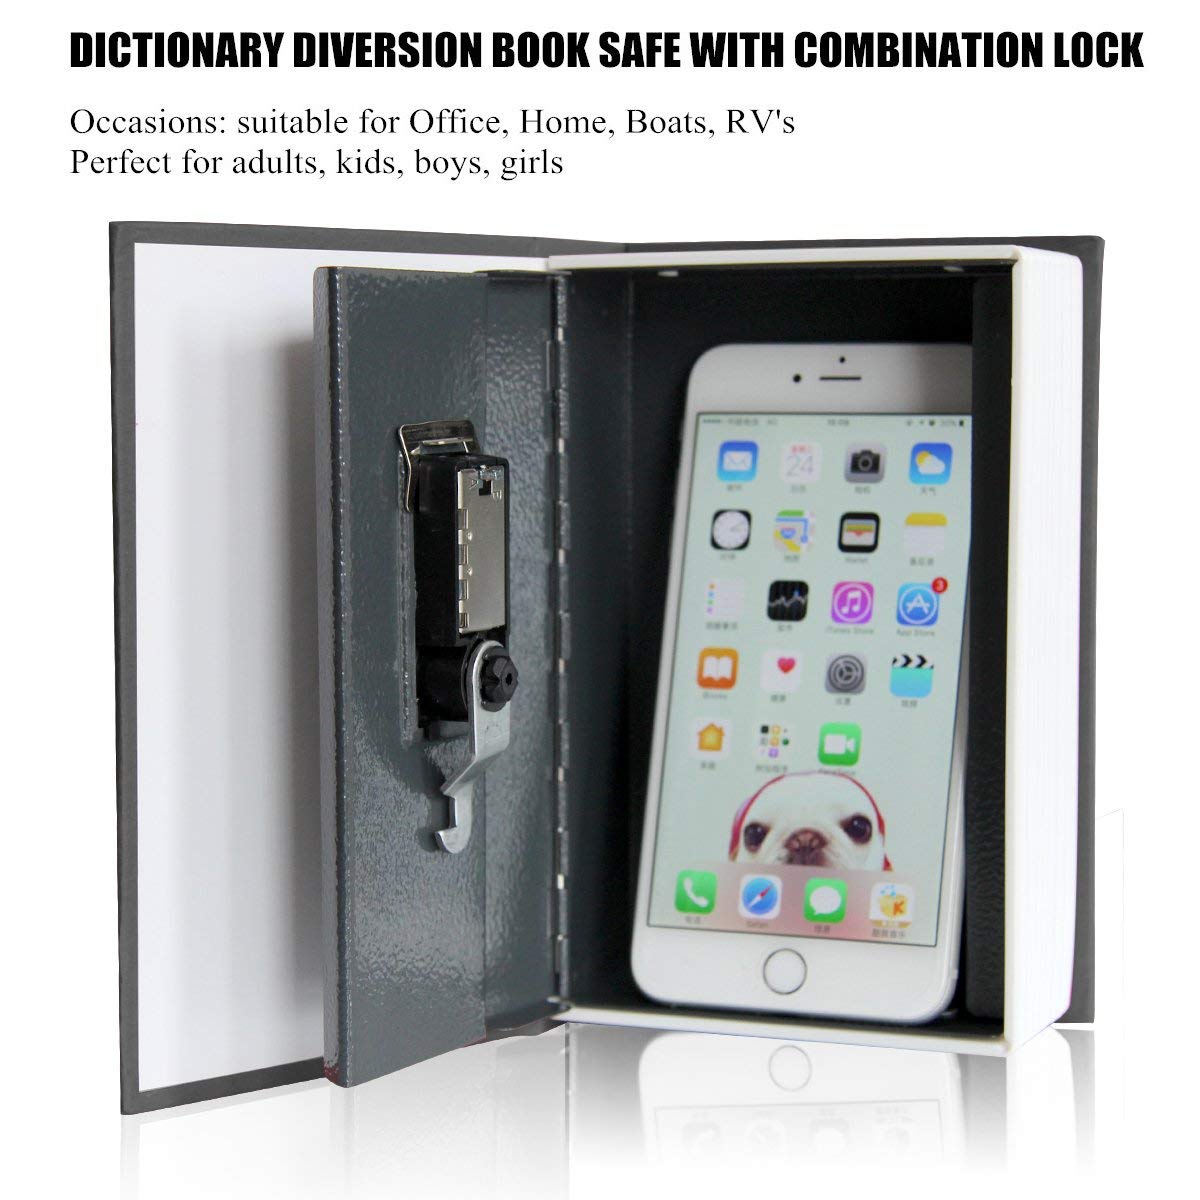 Book Safe with Combination Lock Dictionary Diversion Book Safe Portable Safe Box, Great for storing Money Jewelry Passpor - ebowsos